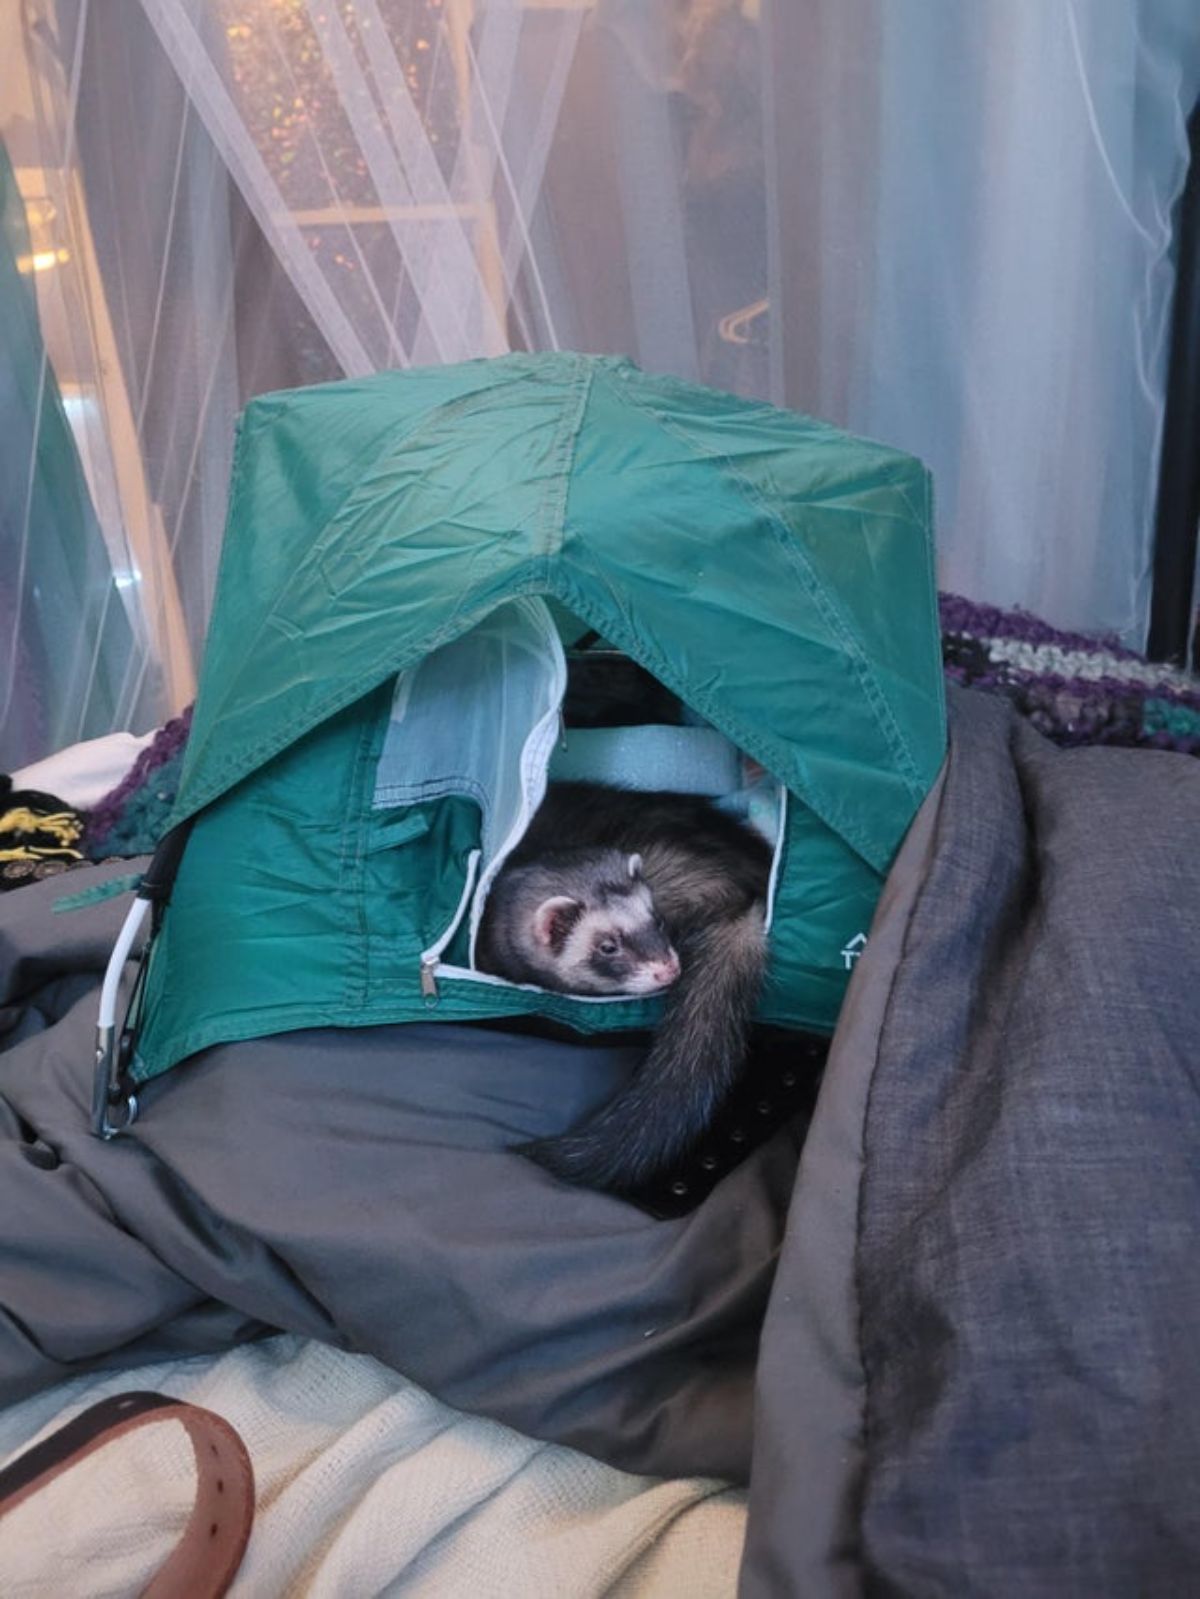 black and white ferret inside green camping gear